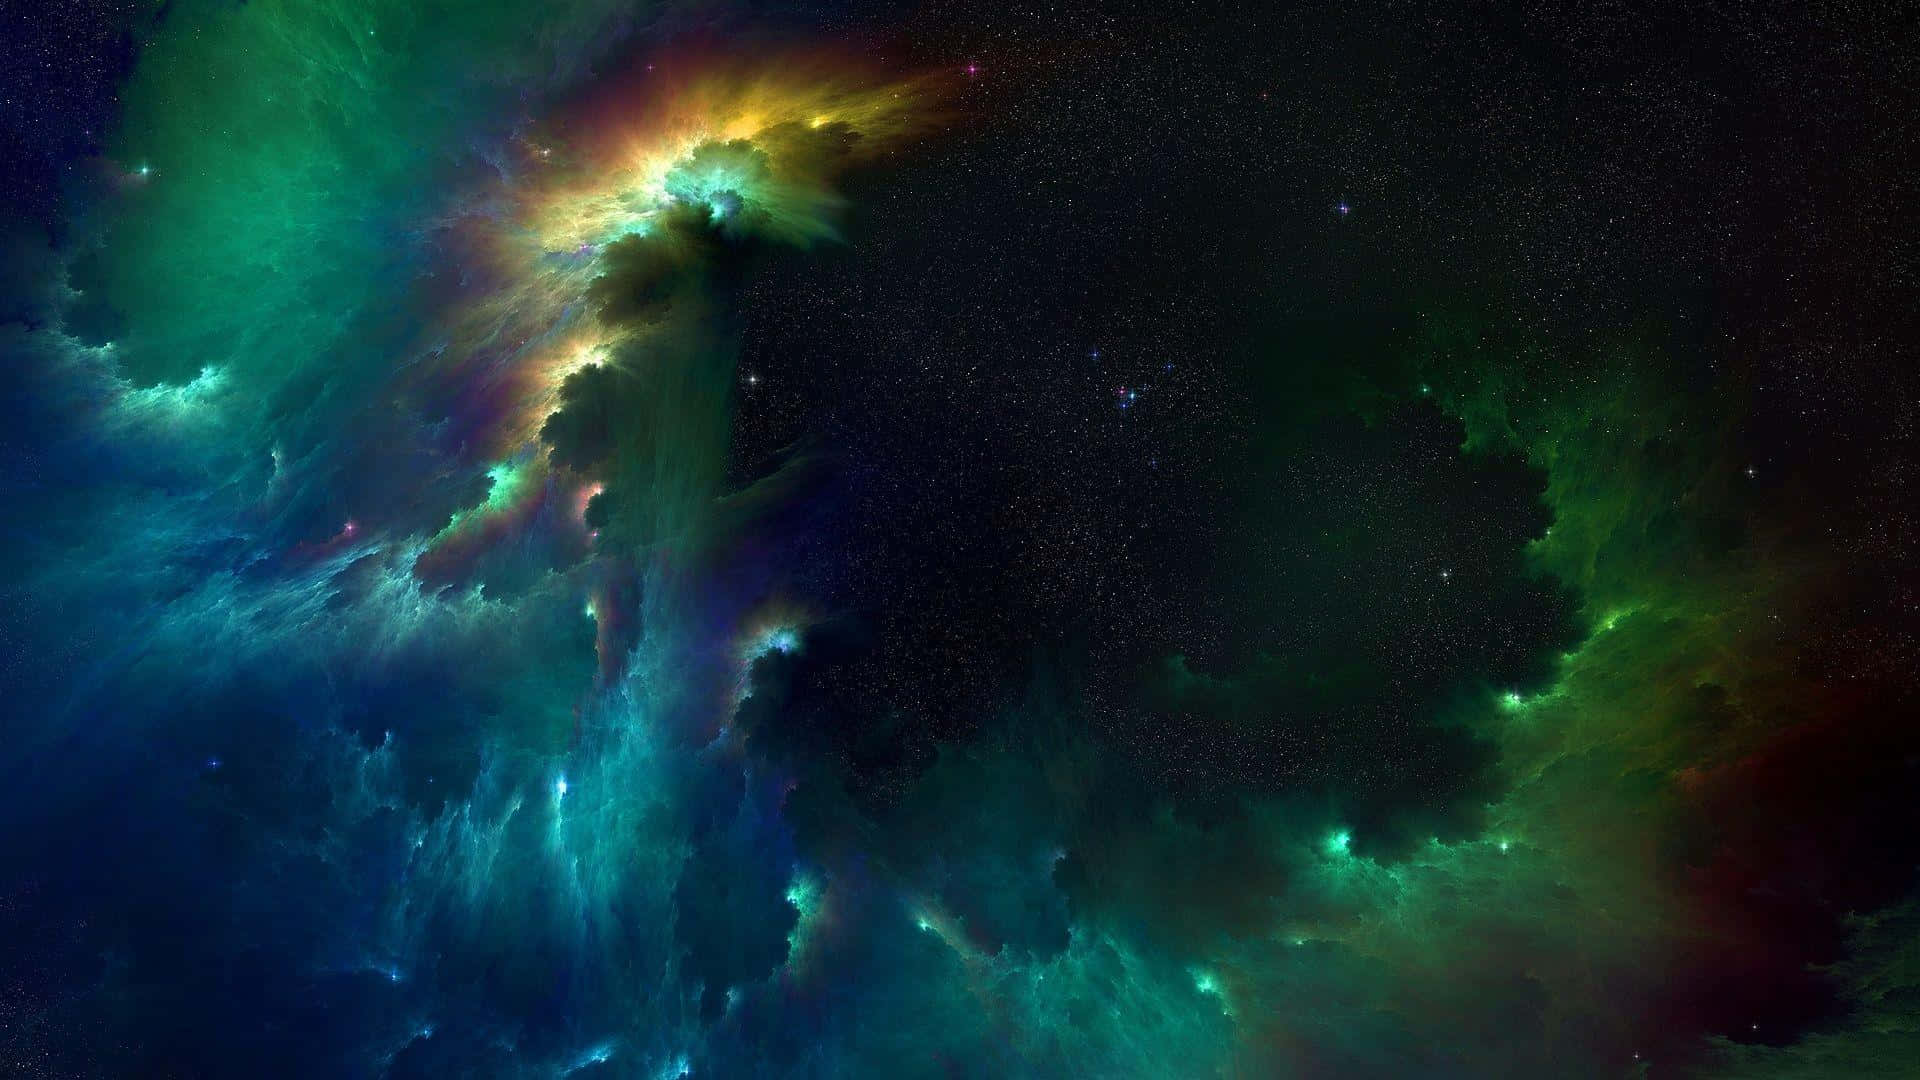 Explore the depths of the Green Galaxy! Wallpaper